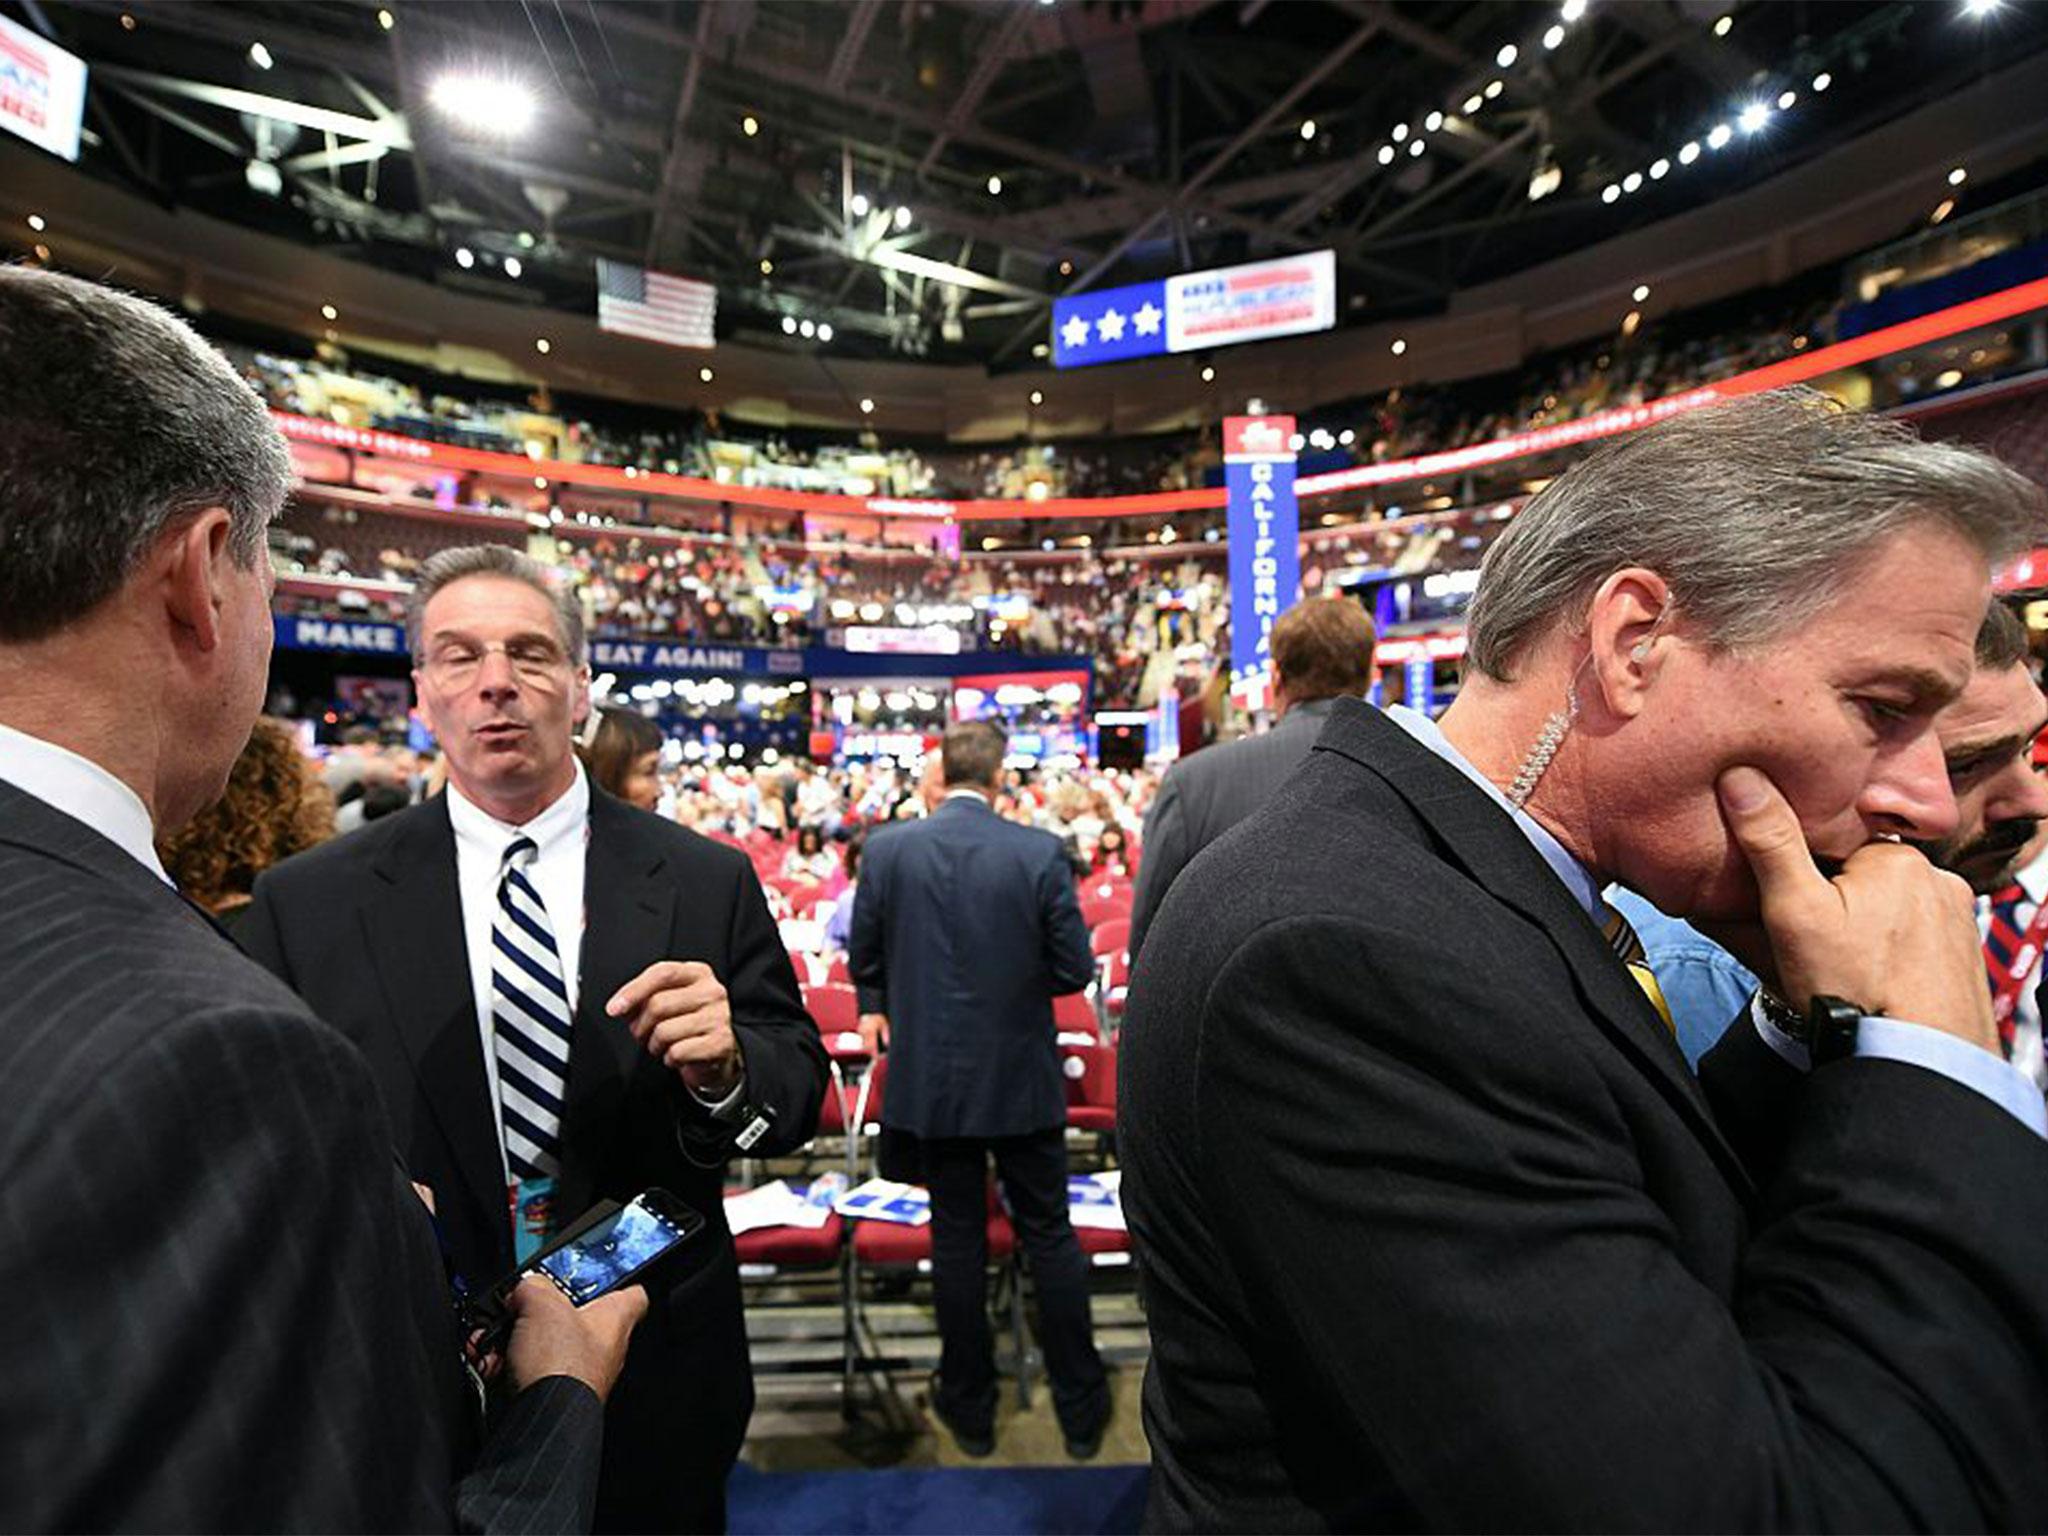 Security teams on the floor of the Republican convention in Cleveland